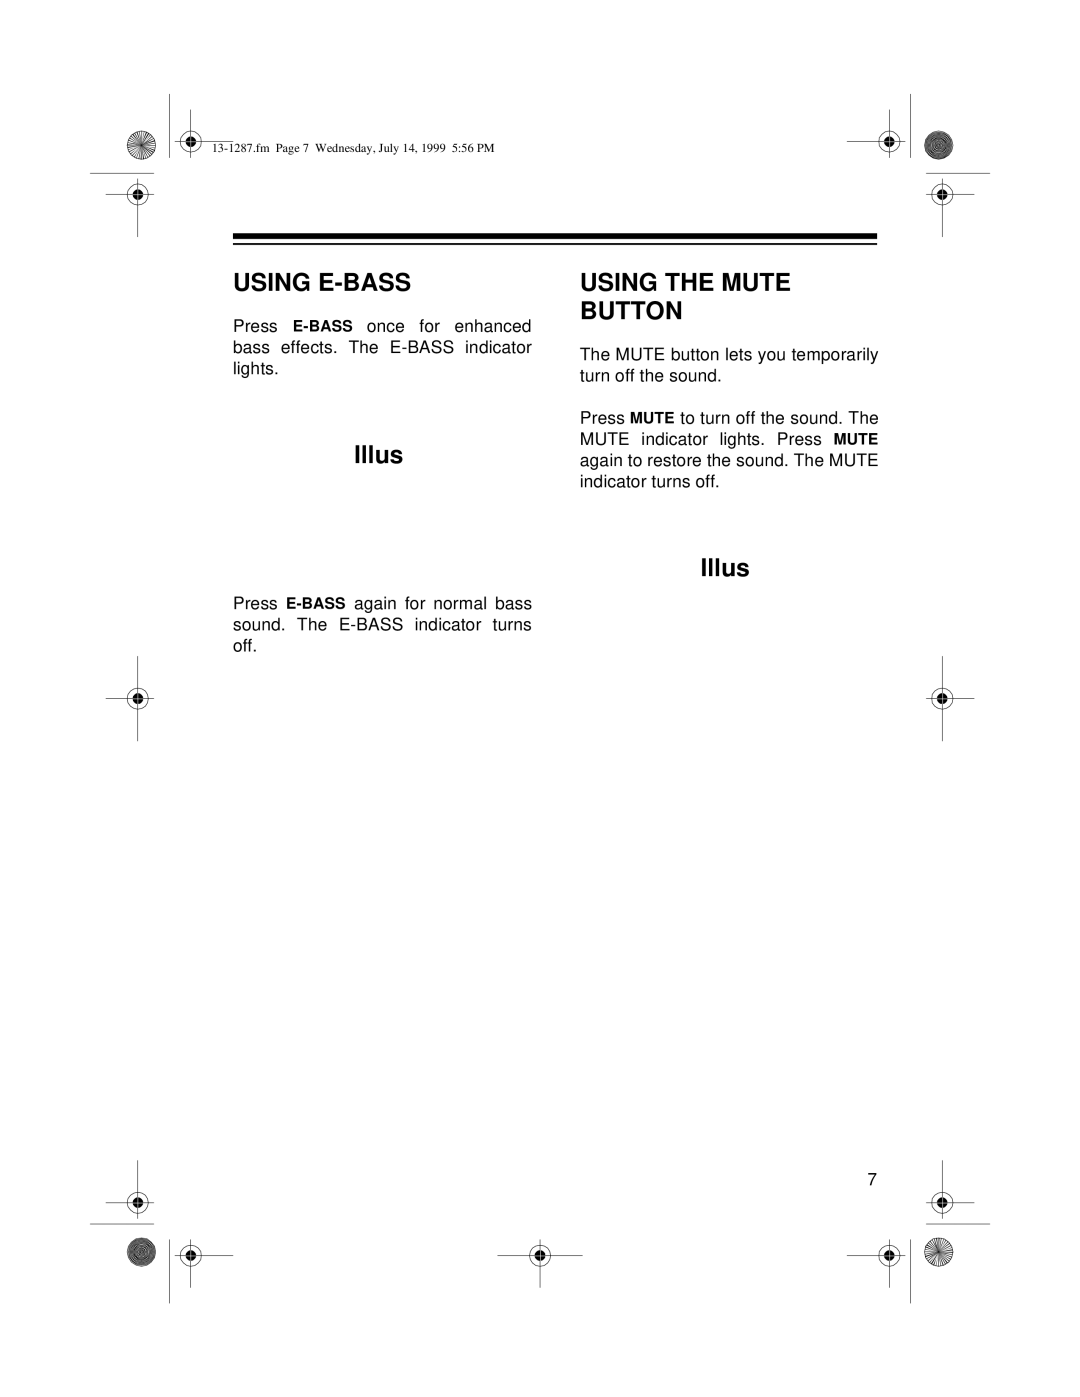 Optimus 740 owner manual Using E-Bass, Using The Mute Button, Illus 